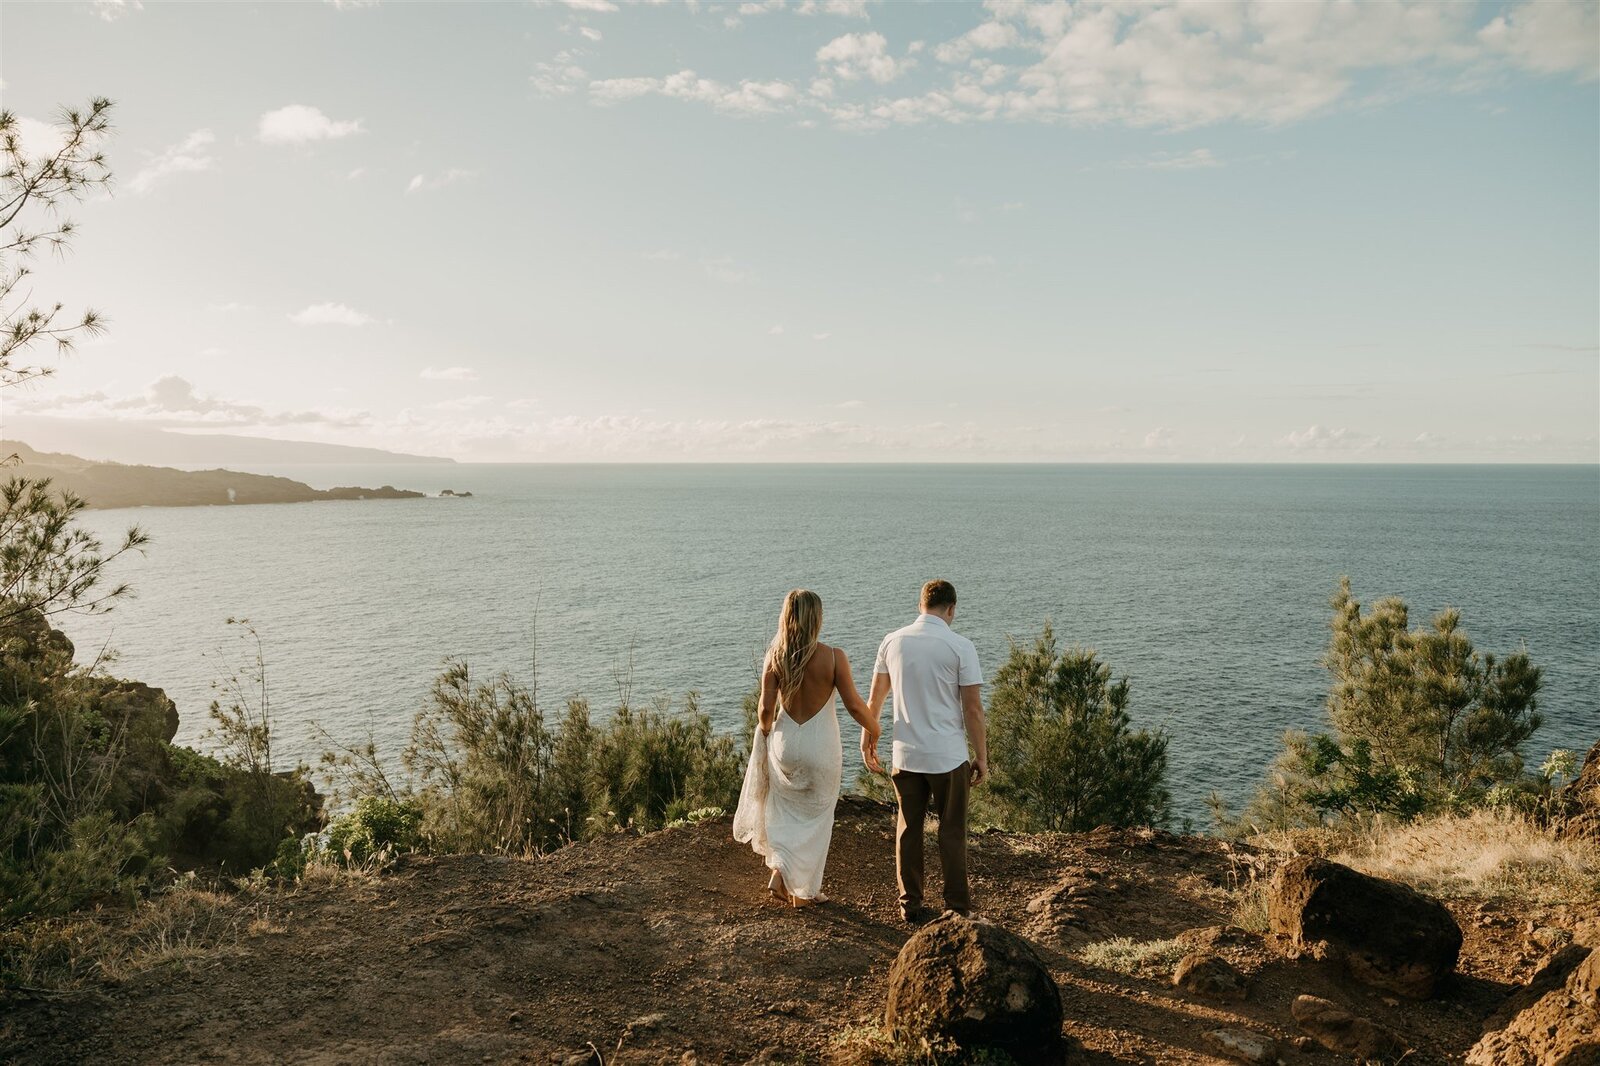 Elopement couple on coastal cliffside in Maui, Hawaii during sunset